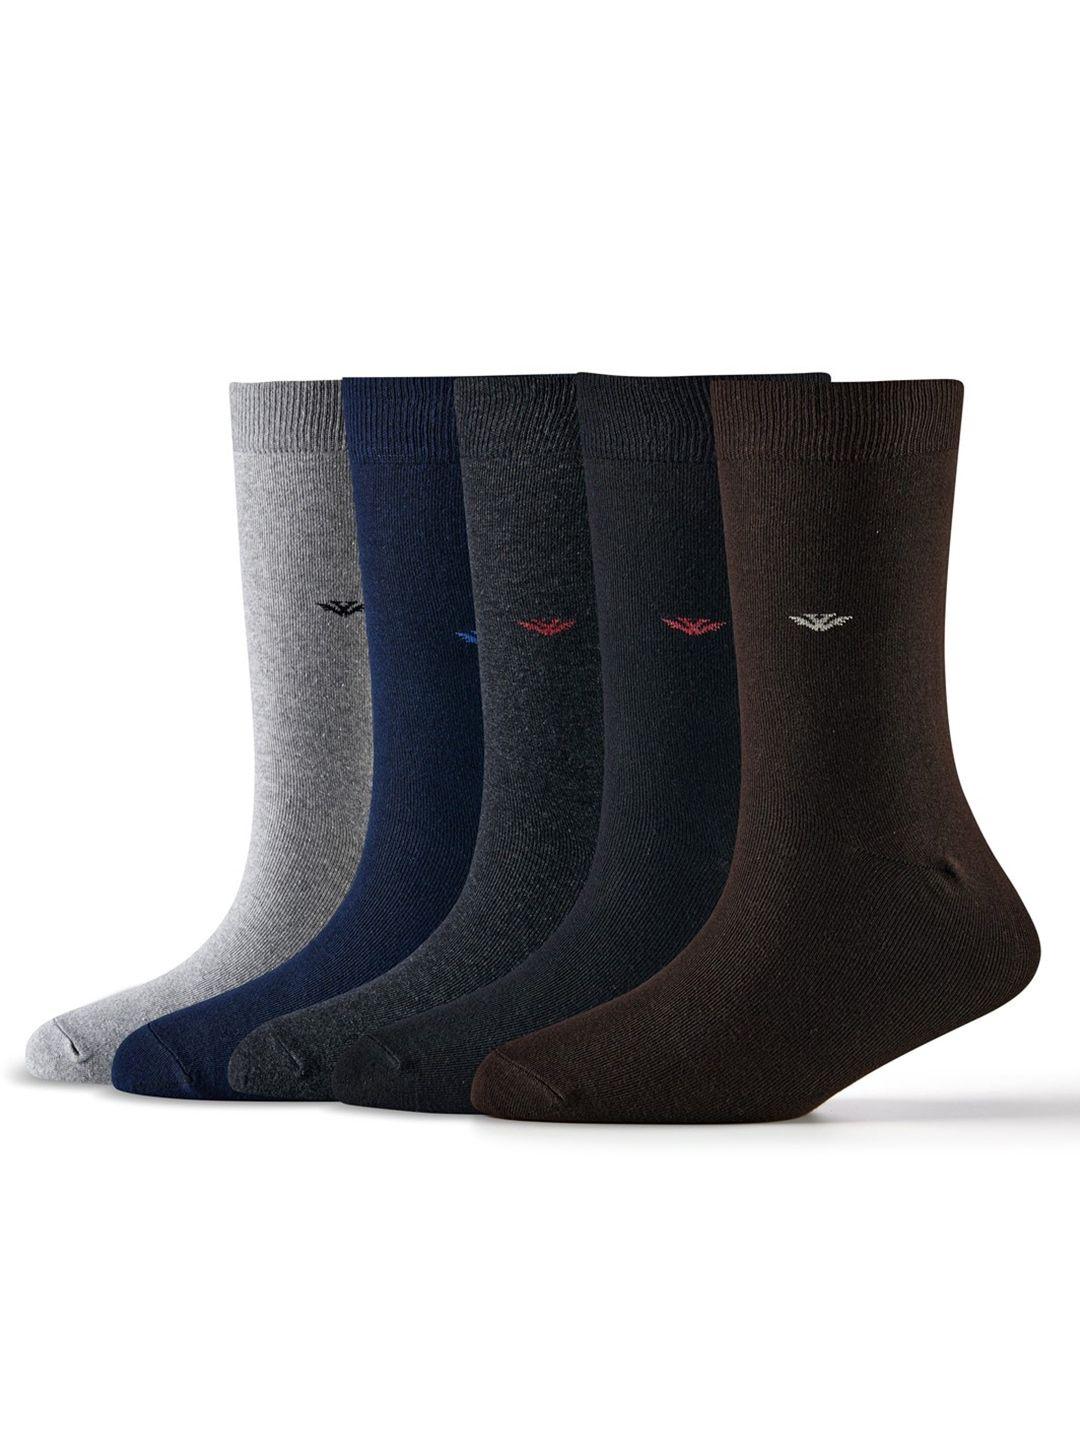 cotstyle-men-pack-of-5-assorted-calf-length-socks